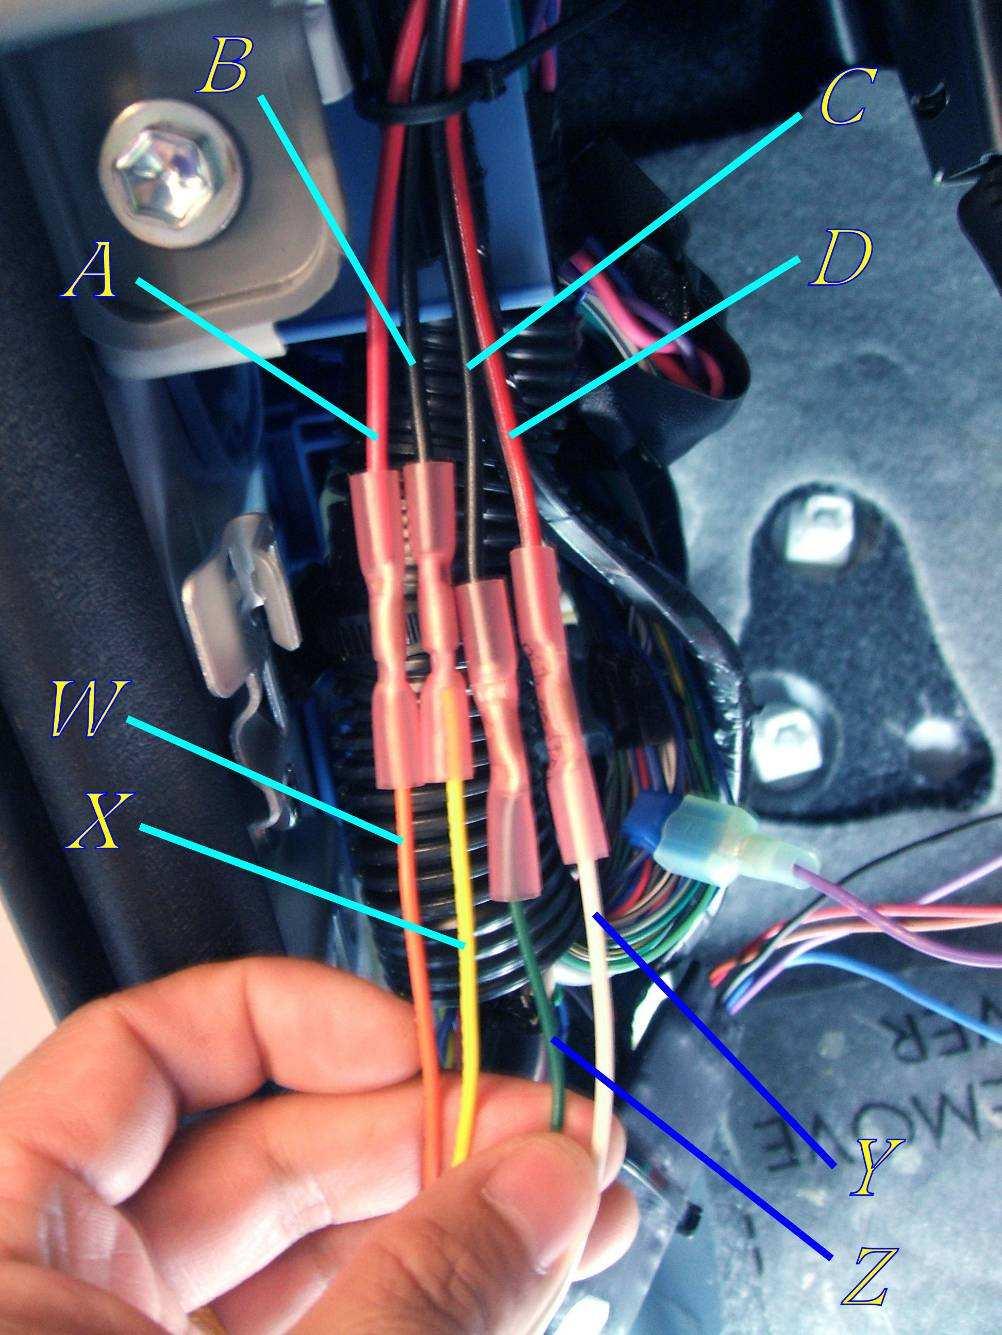 BI-COLOR WIRE IDENTIFICATION (FOR AMBER TURN ONLY OR RED TURN ONLY SEE PAGE 12 & 13) 1 Table -1 Signal mirror Harness Connect C-Module LH Red Wire (A) To Orange Wire (W) LH Black Wire (B) To Yellow